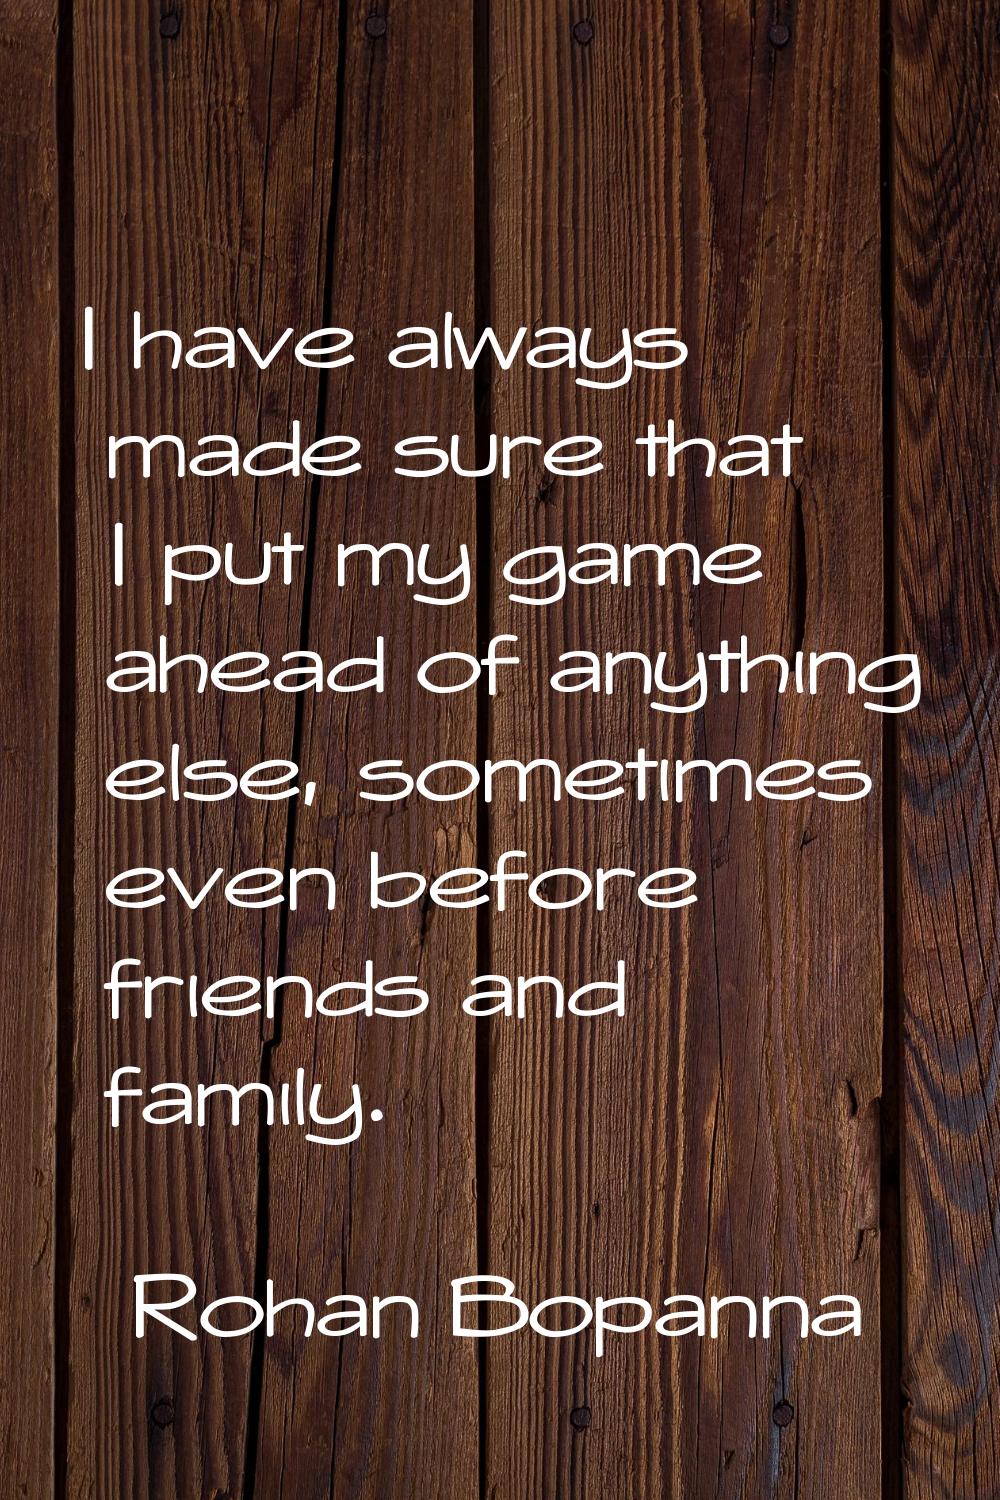 I have always made sure that I put my game ahead of anything else, sometimes even before friends an